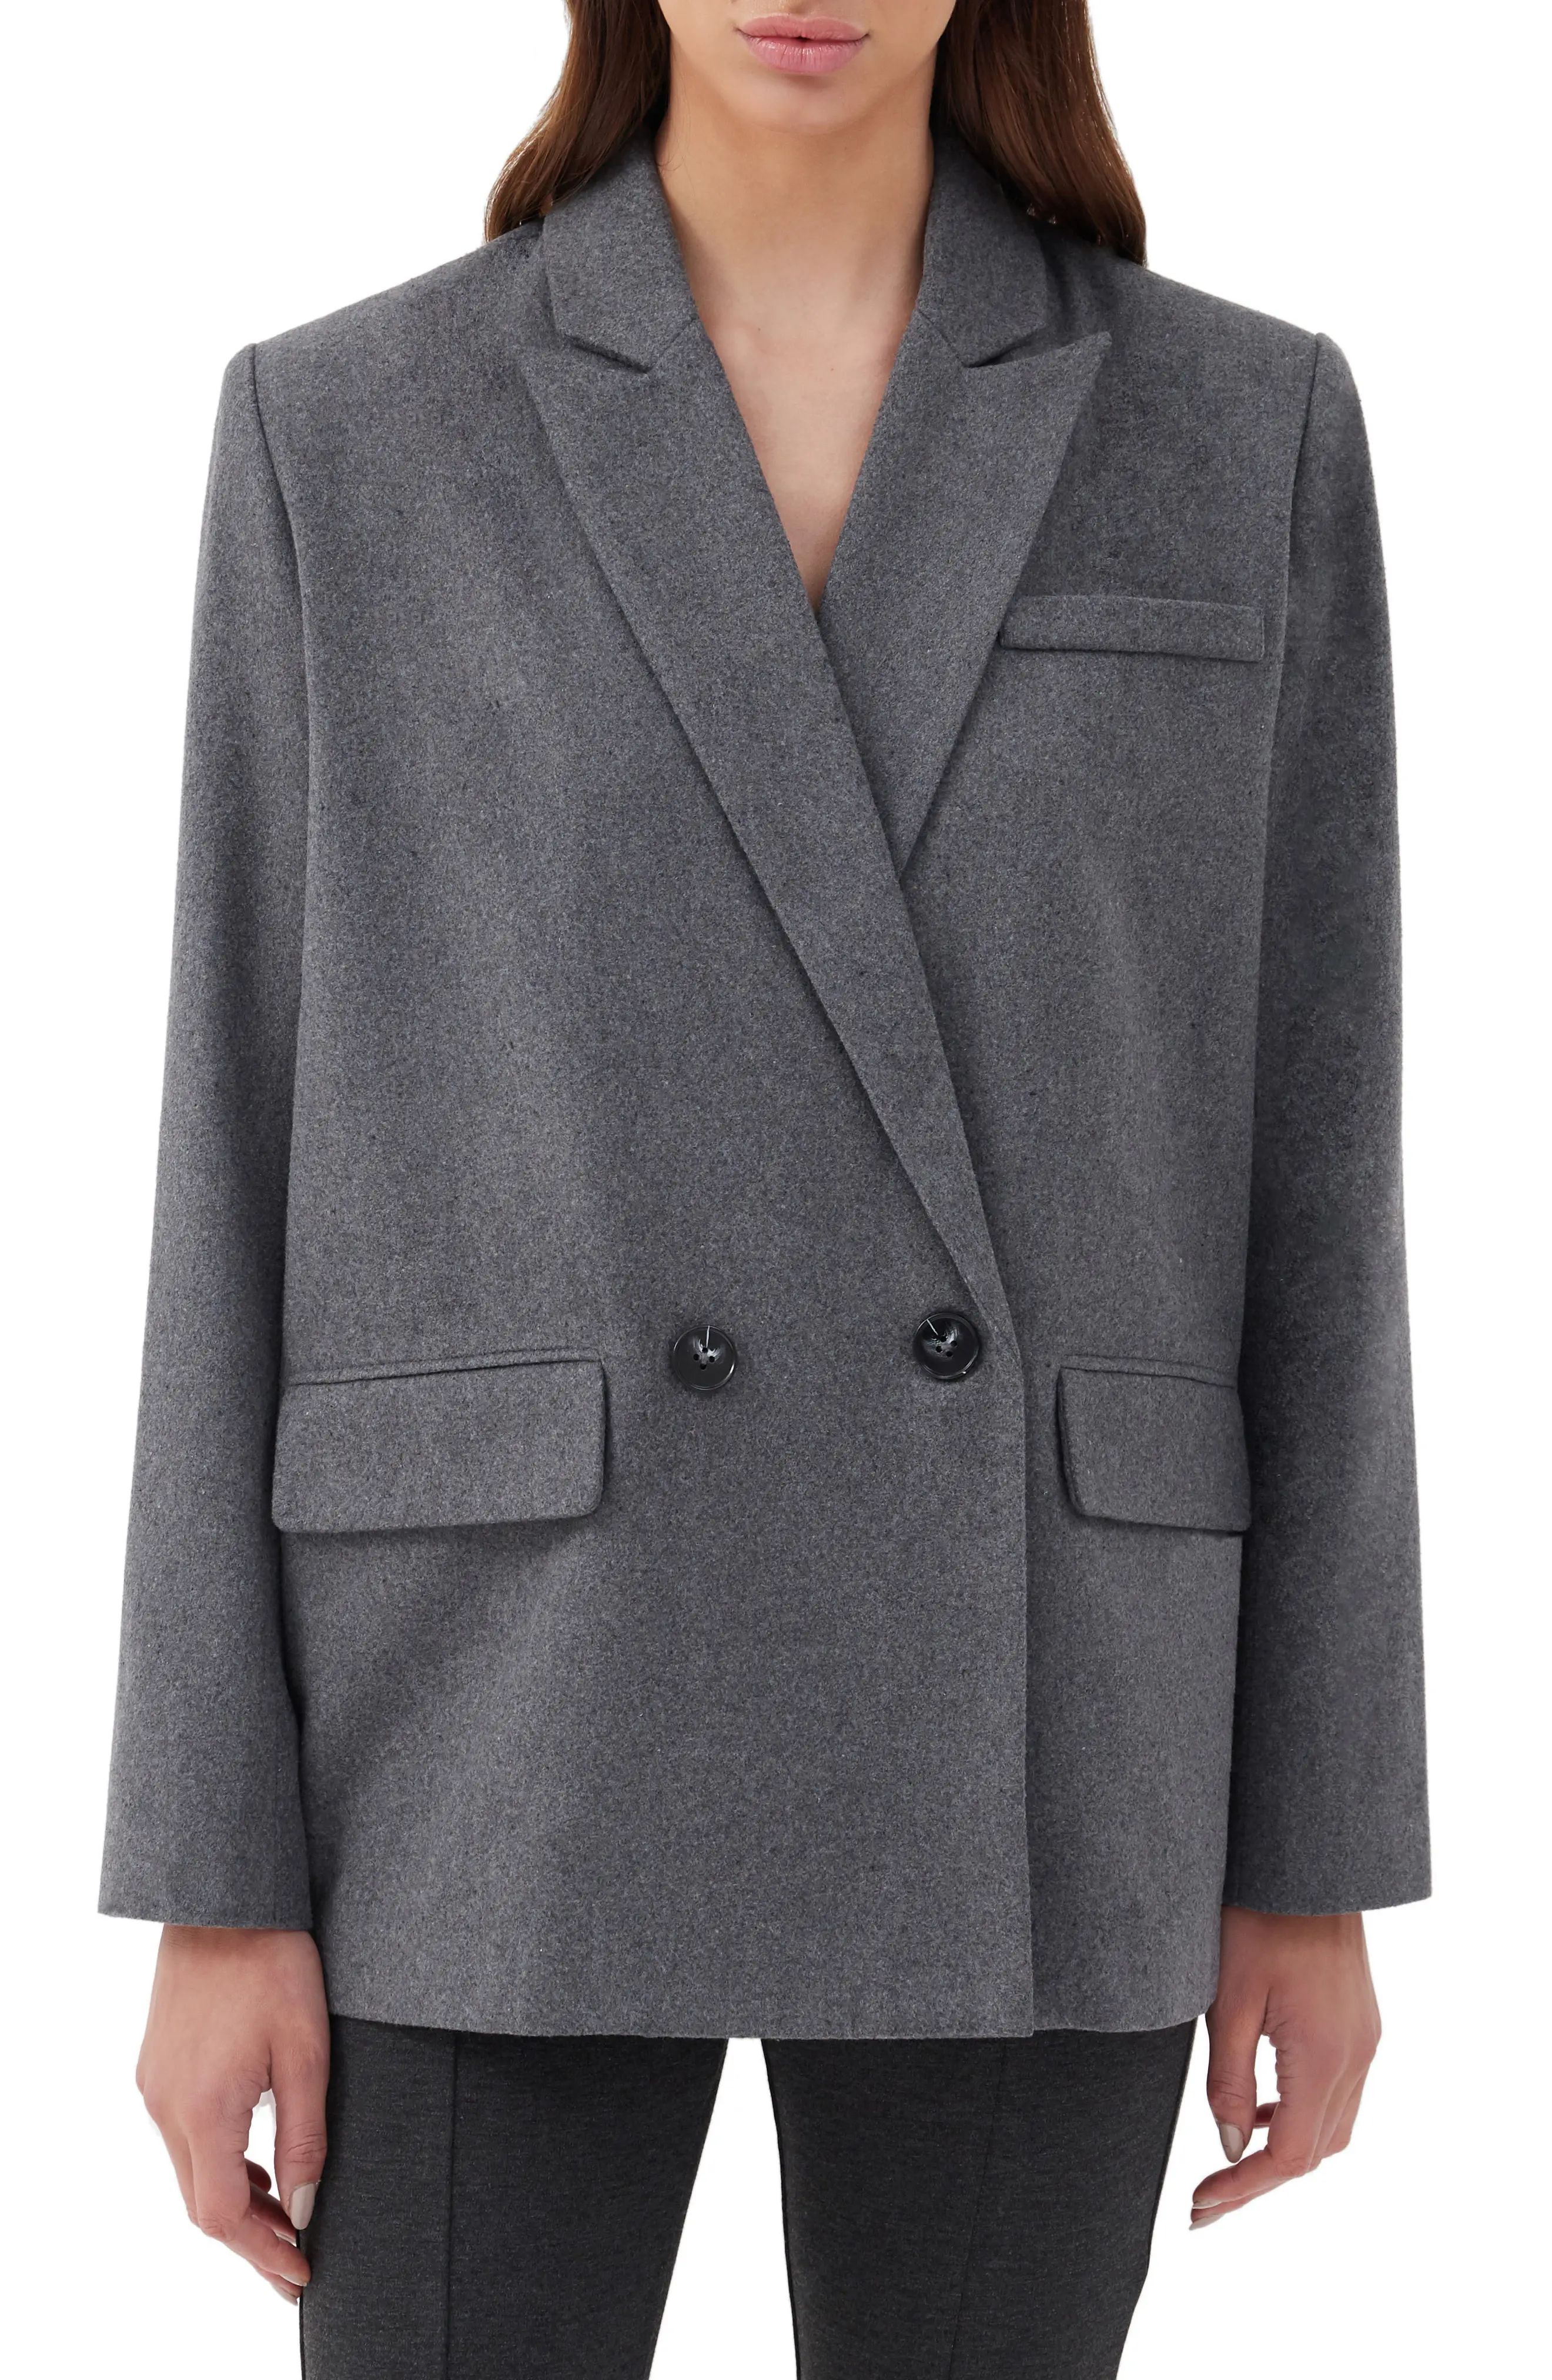 4th & Reckless Eira Oversize Double Breasted Blazer in Dark Grey at Nordstrom, Size Large | Nordstrom